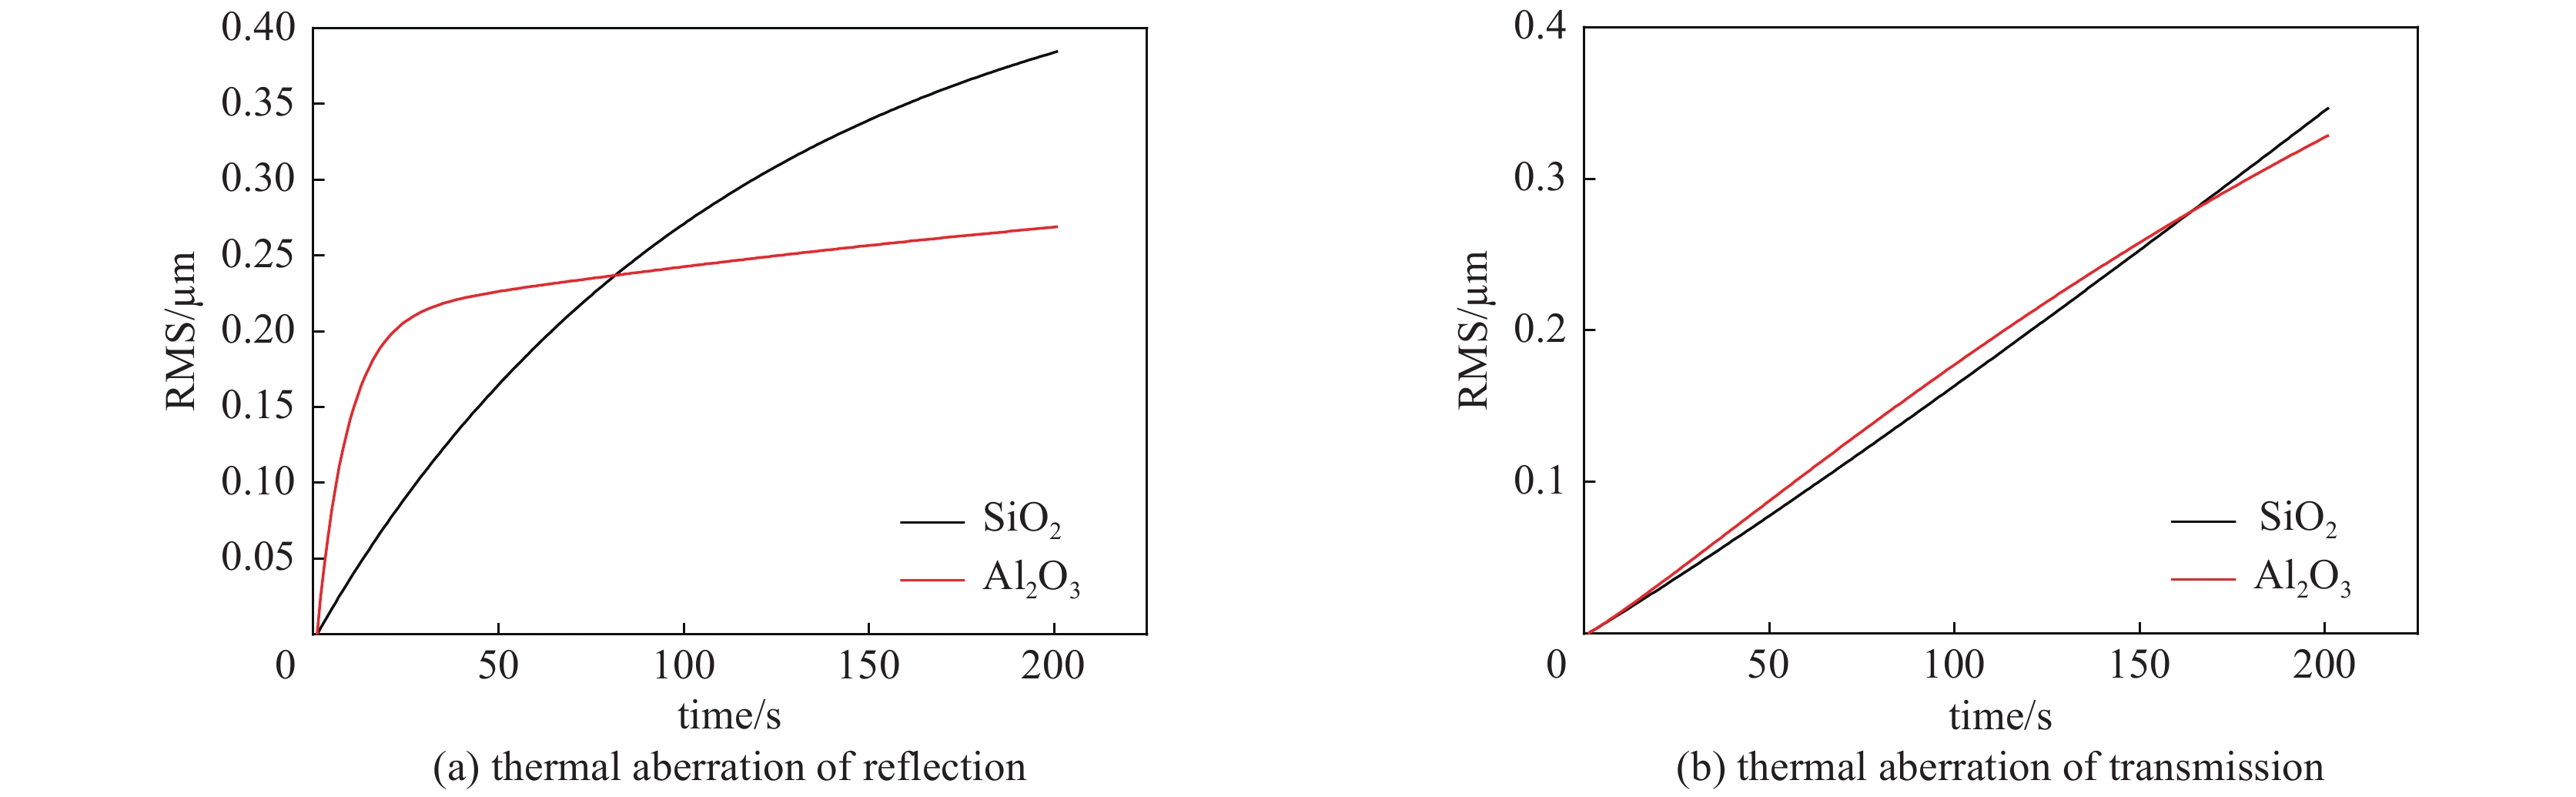 Thermal aberrations of reflection and transmission for SiO2 and Al2O3